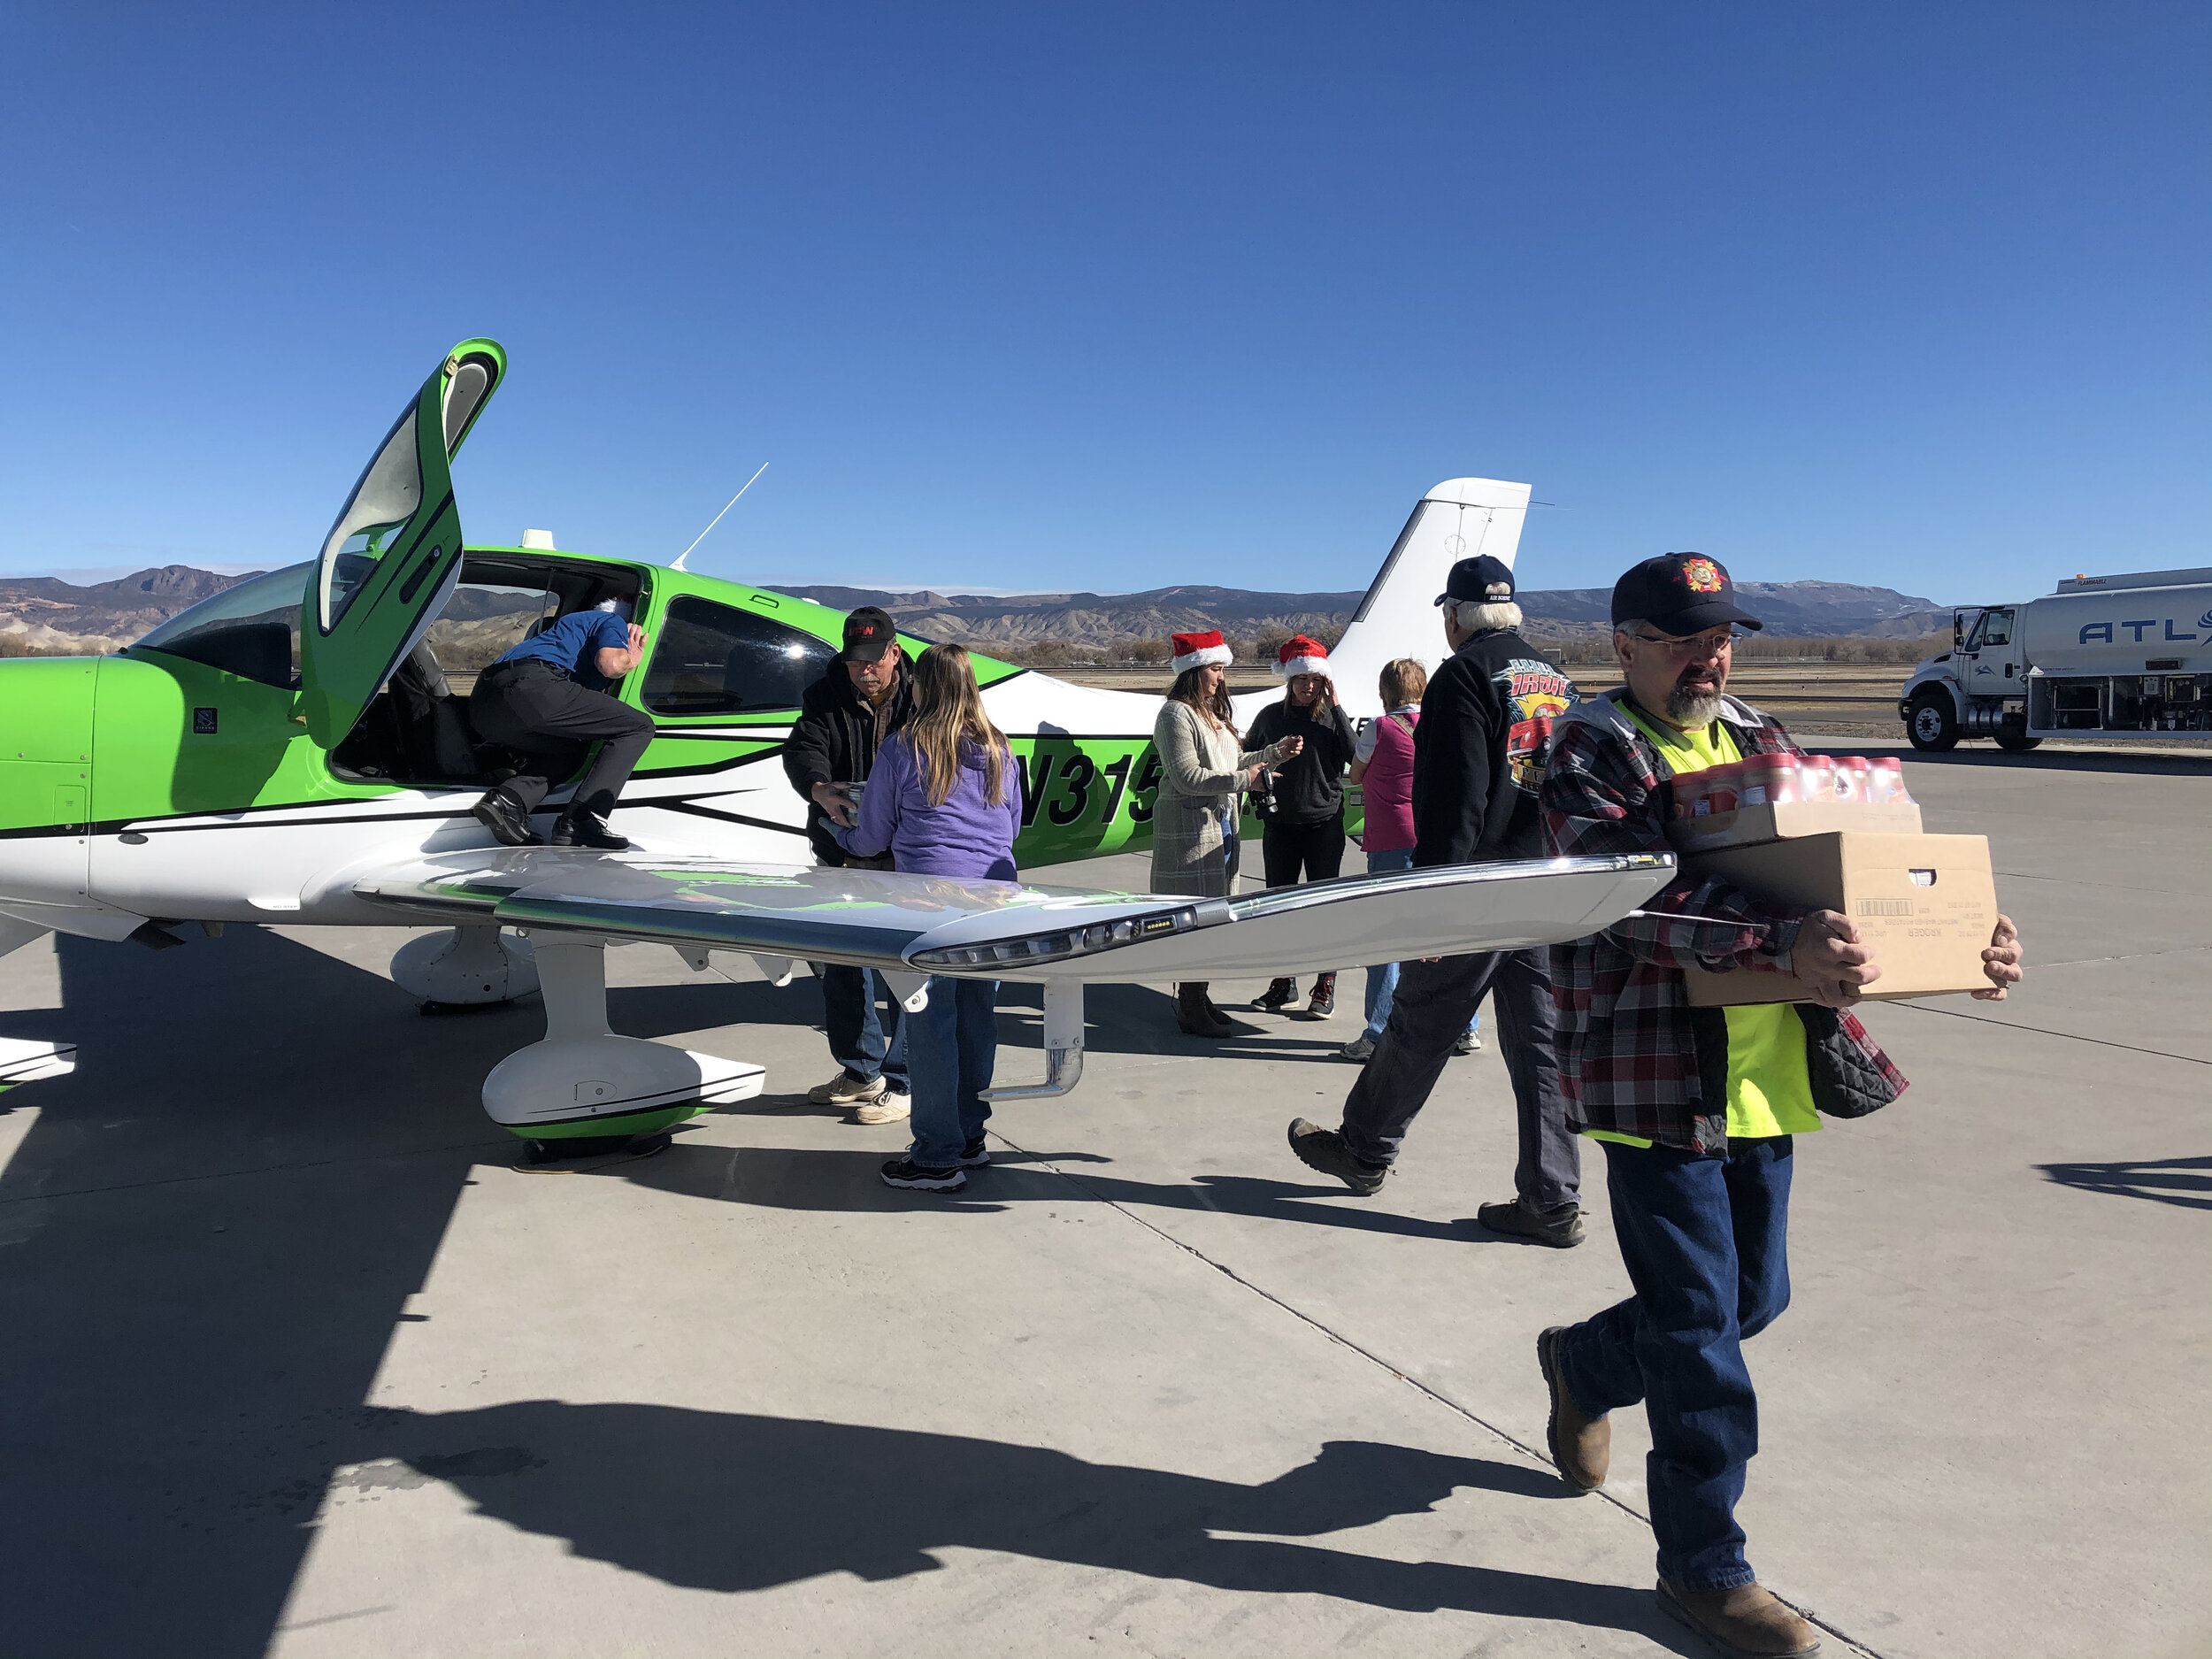 IA Instructors Kiley Lynch, Stephen Slade, Ricky Burton and IA Member Karen Seaton volunteer to fly almost 700lbs of toys and food to Montrose, CO veterans in need for the VFW/CABA annual airlift.